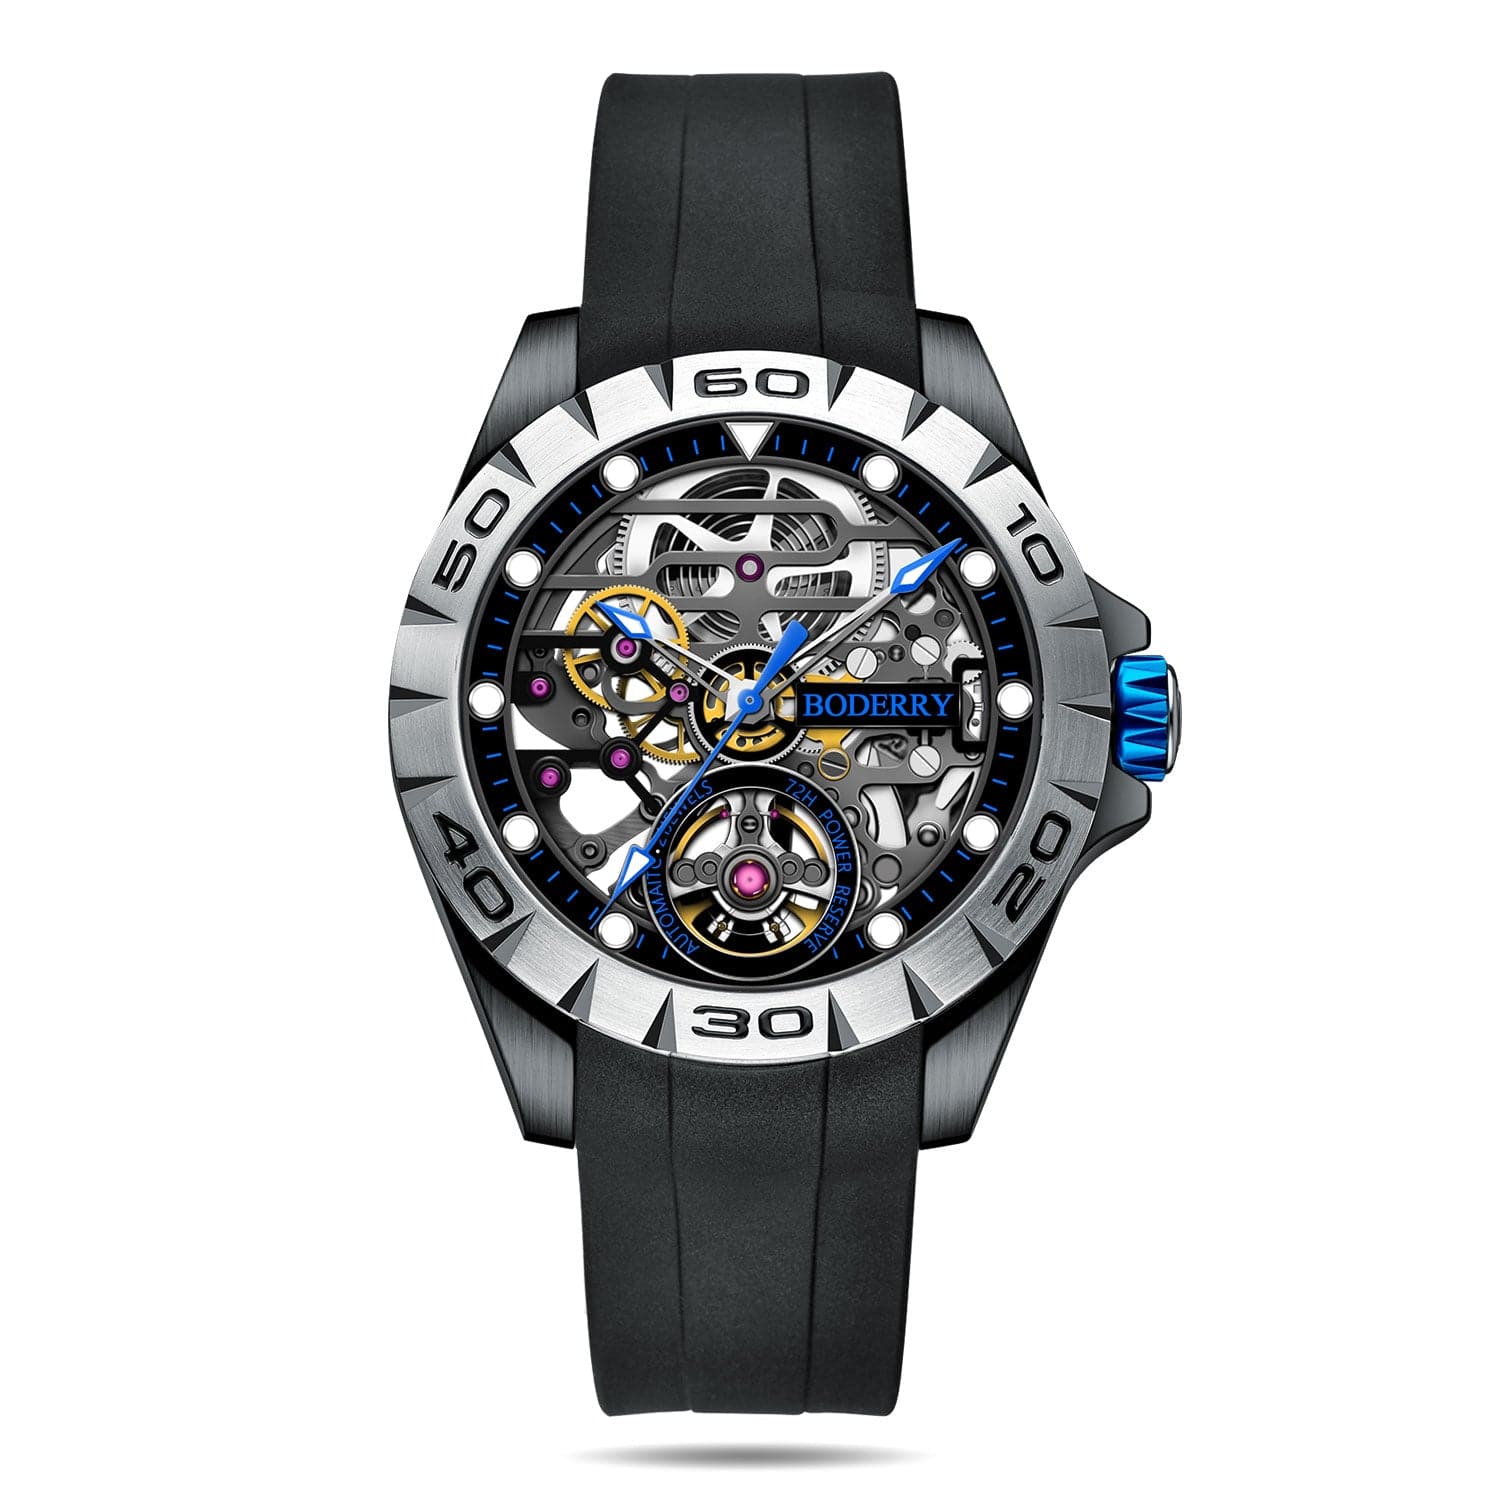 URBAN SKELETON(BLACK CASE)- 3-Hand Hi-beat(28,800 bph) with 72 hrs Power-reserve Automatic Watch